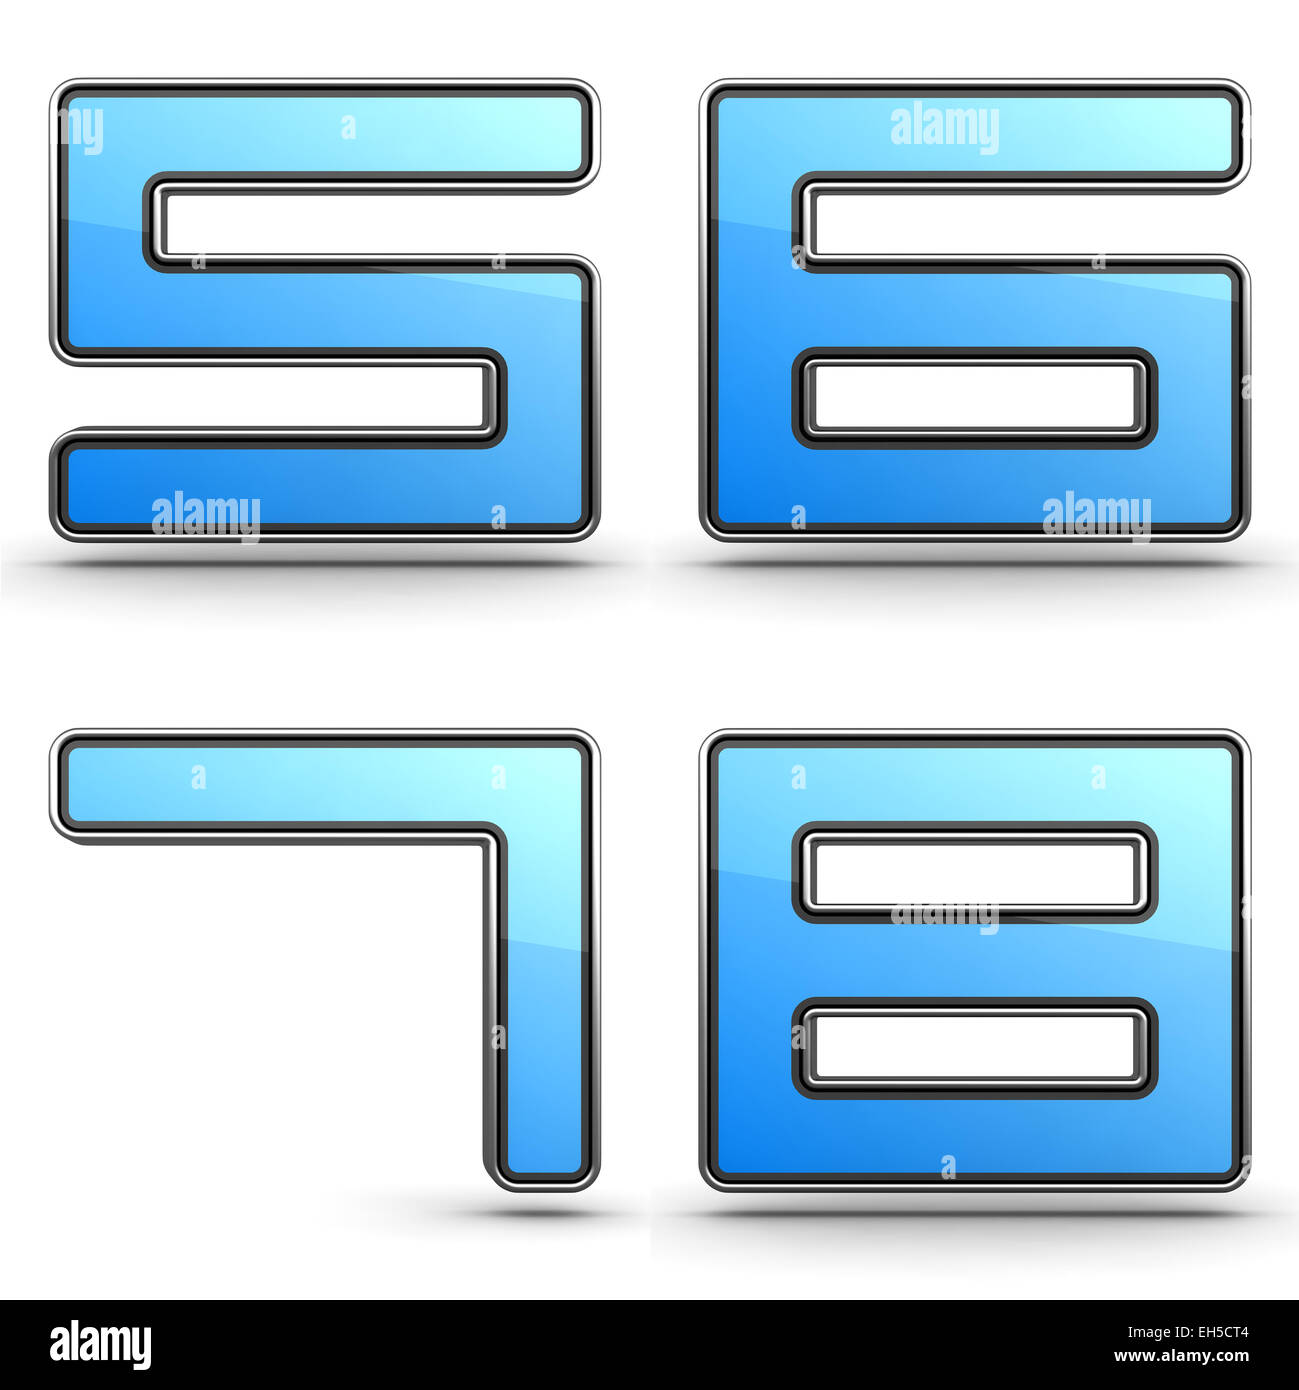 Digits 5,6,7,8 - Set of 3D Digits in Touchpad Style. Stock Photo